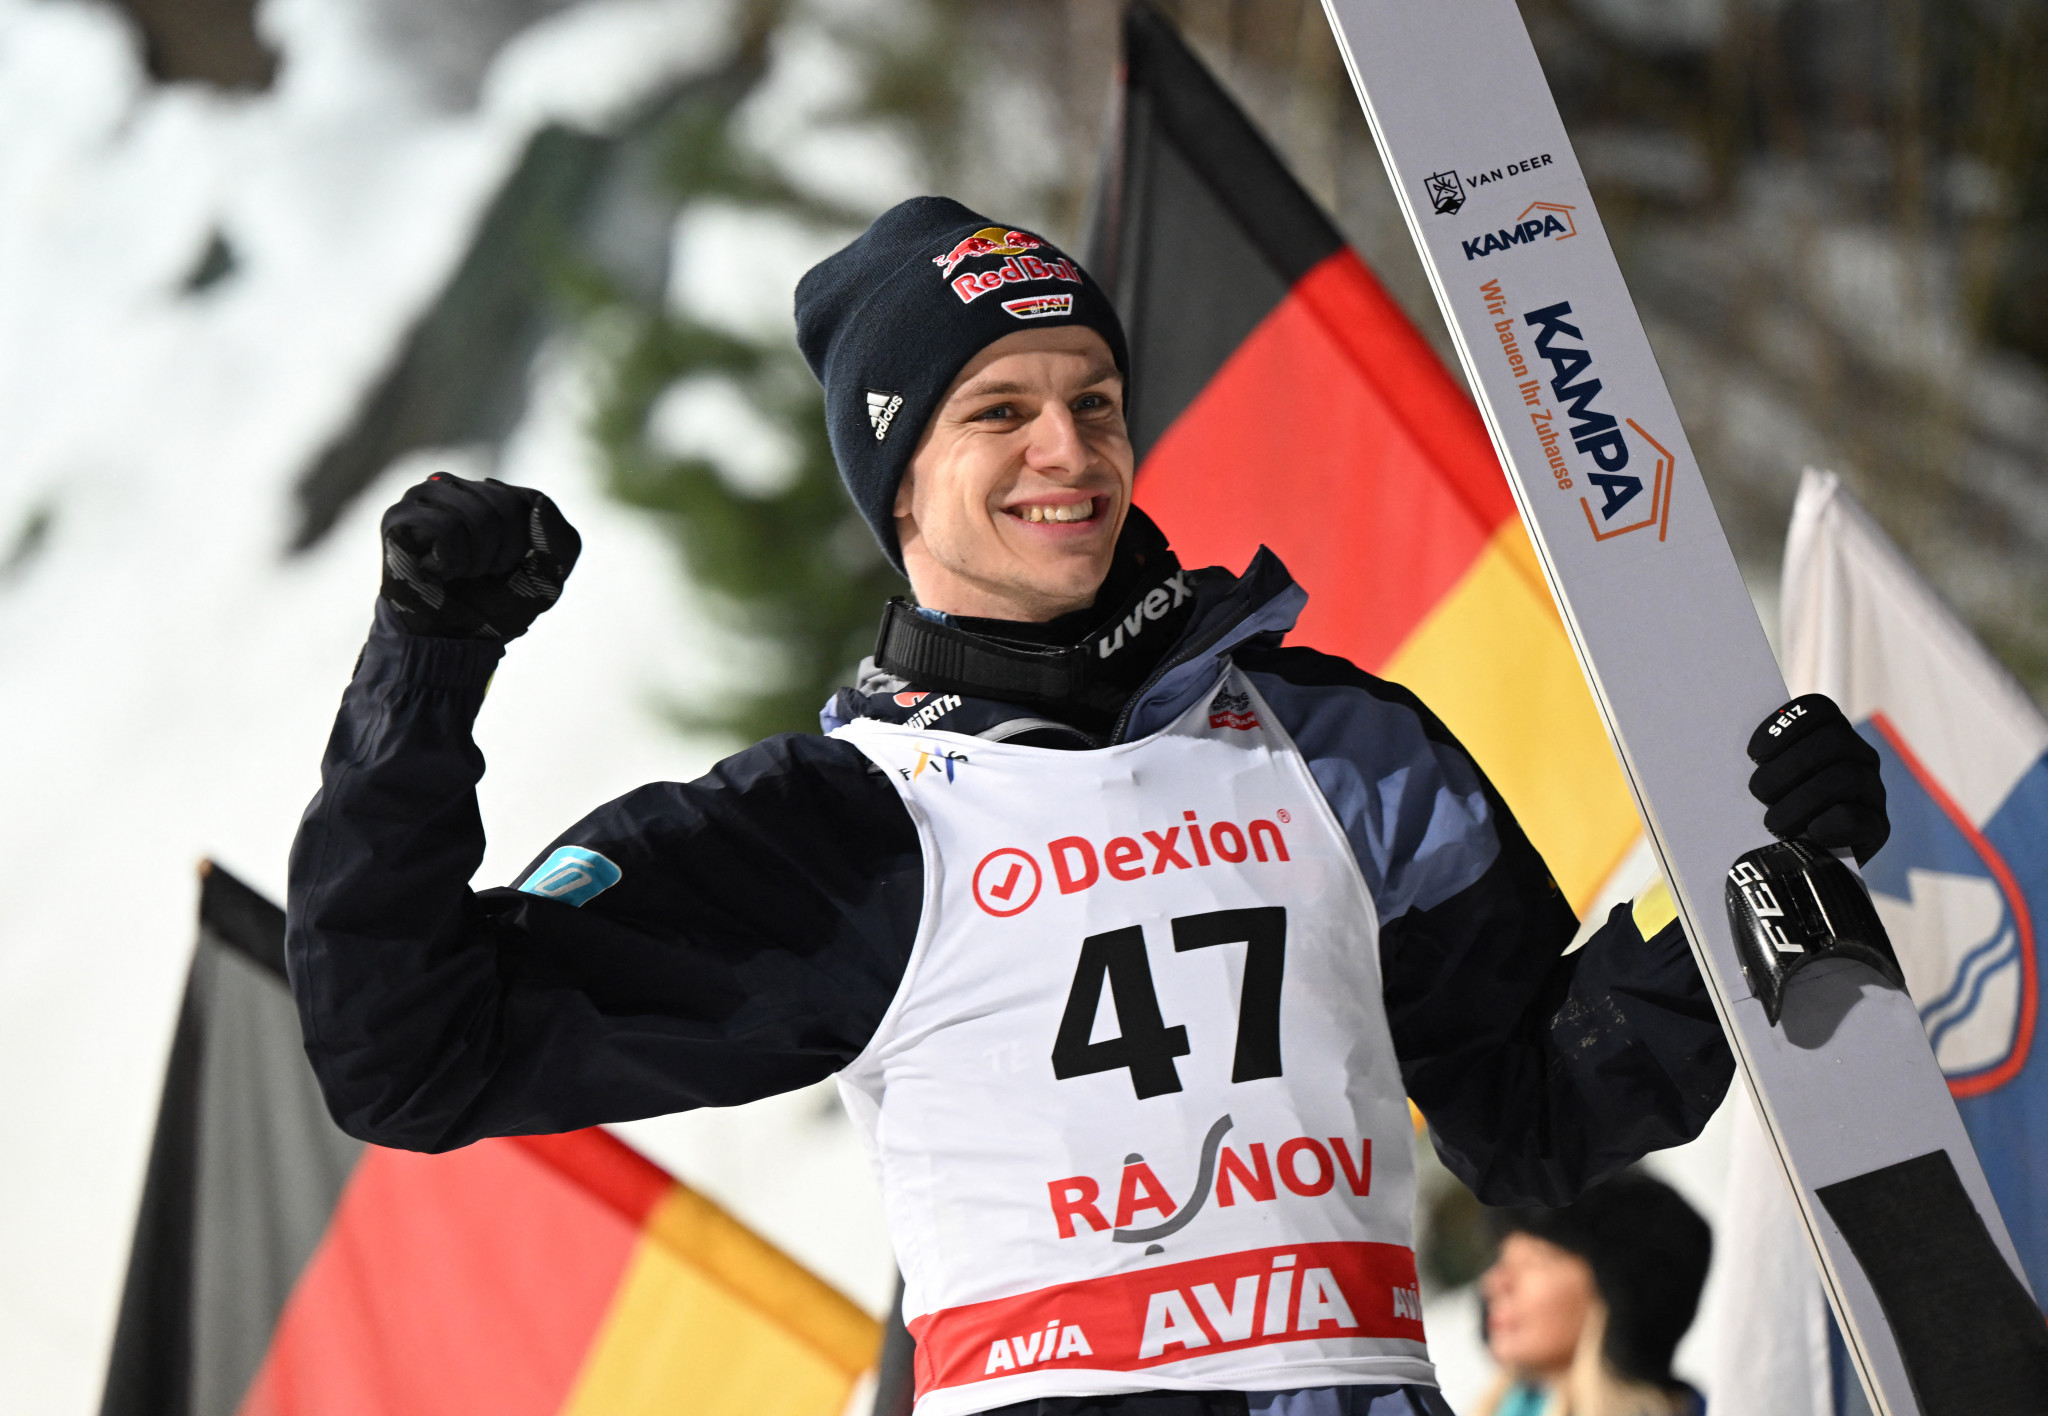 Andreas Wellinger triumphed in a men's competition lacking most of the leaders on this season's Ski Jumping World Cup circuit ©Getty Images